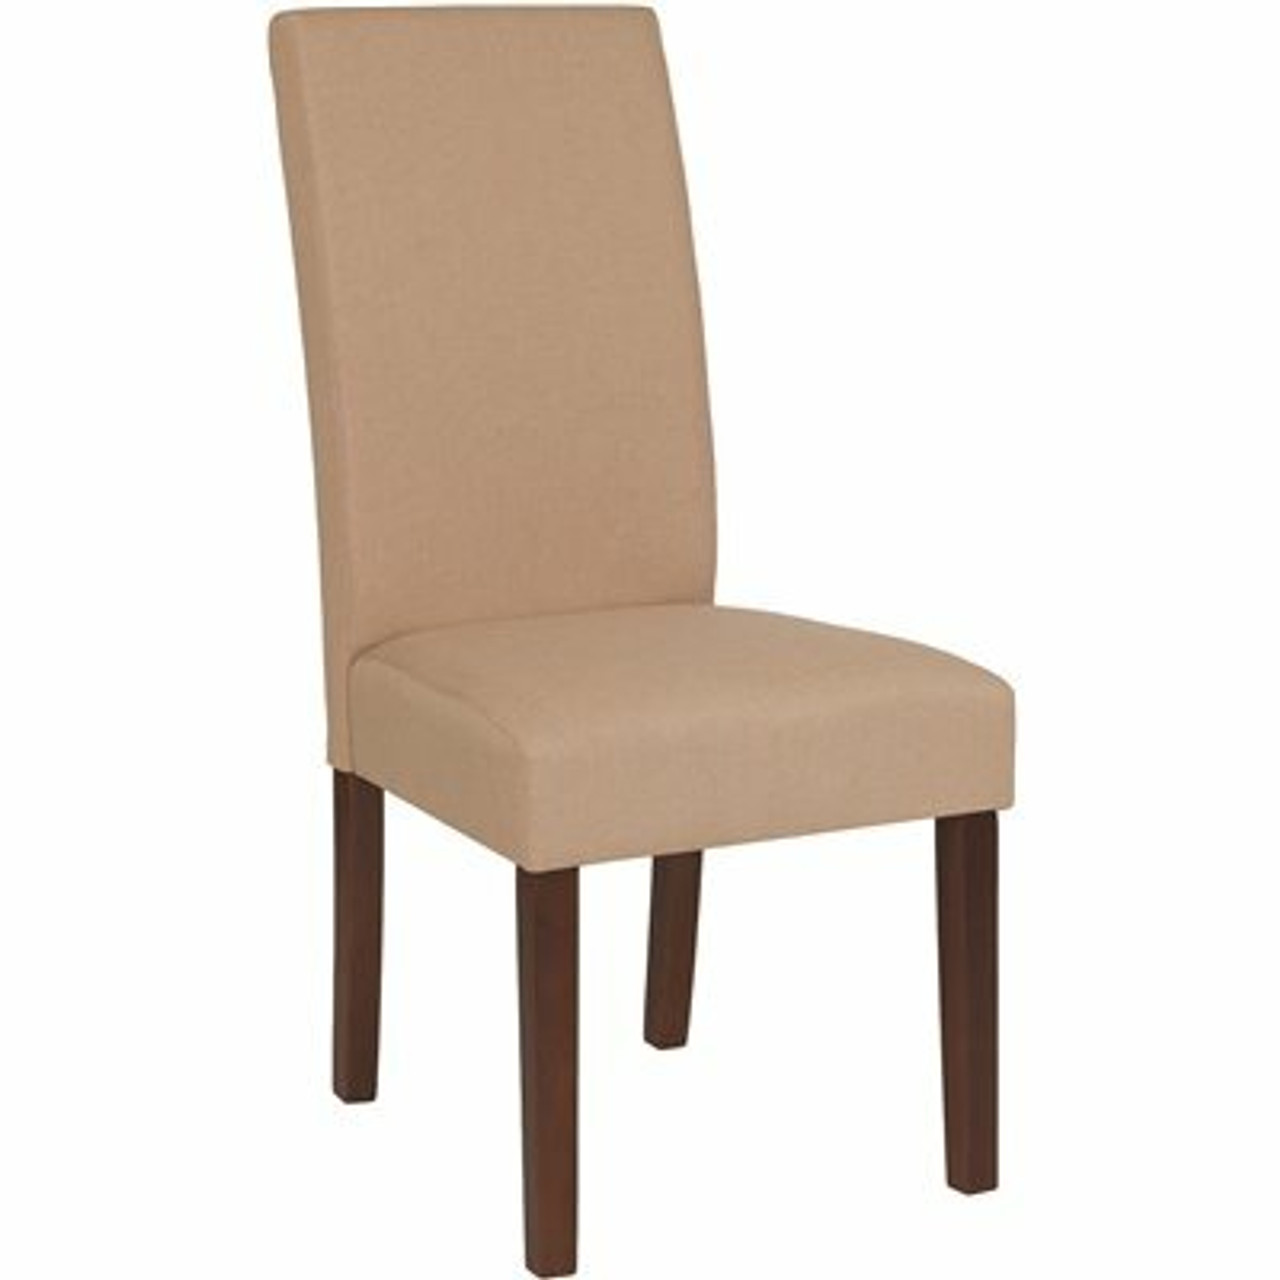 Carnegy Avenue Beige Fabric Fabric Dining Chair